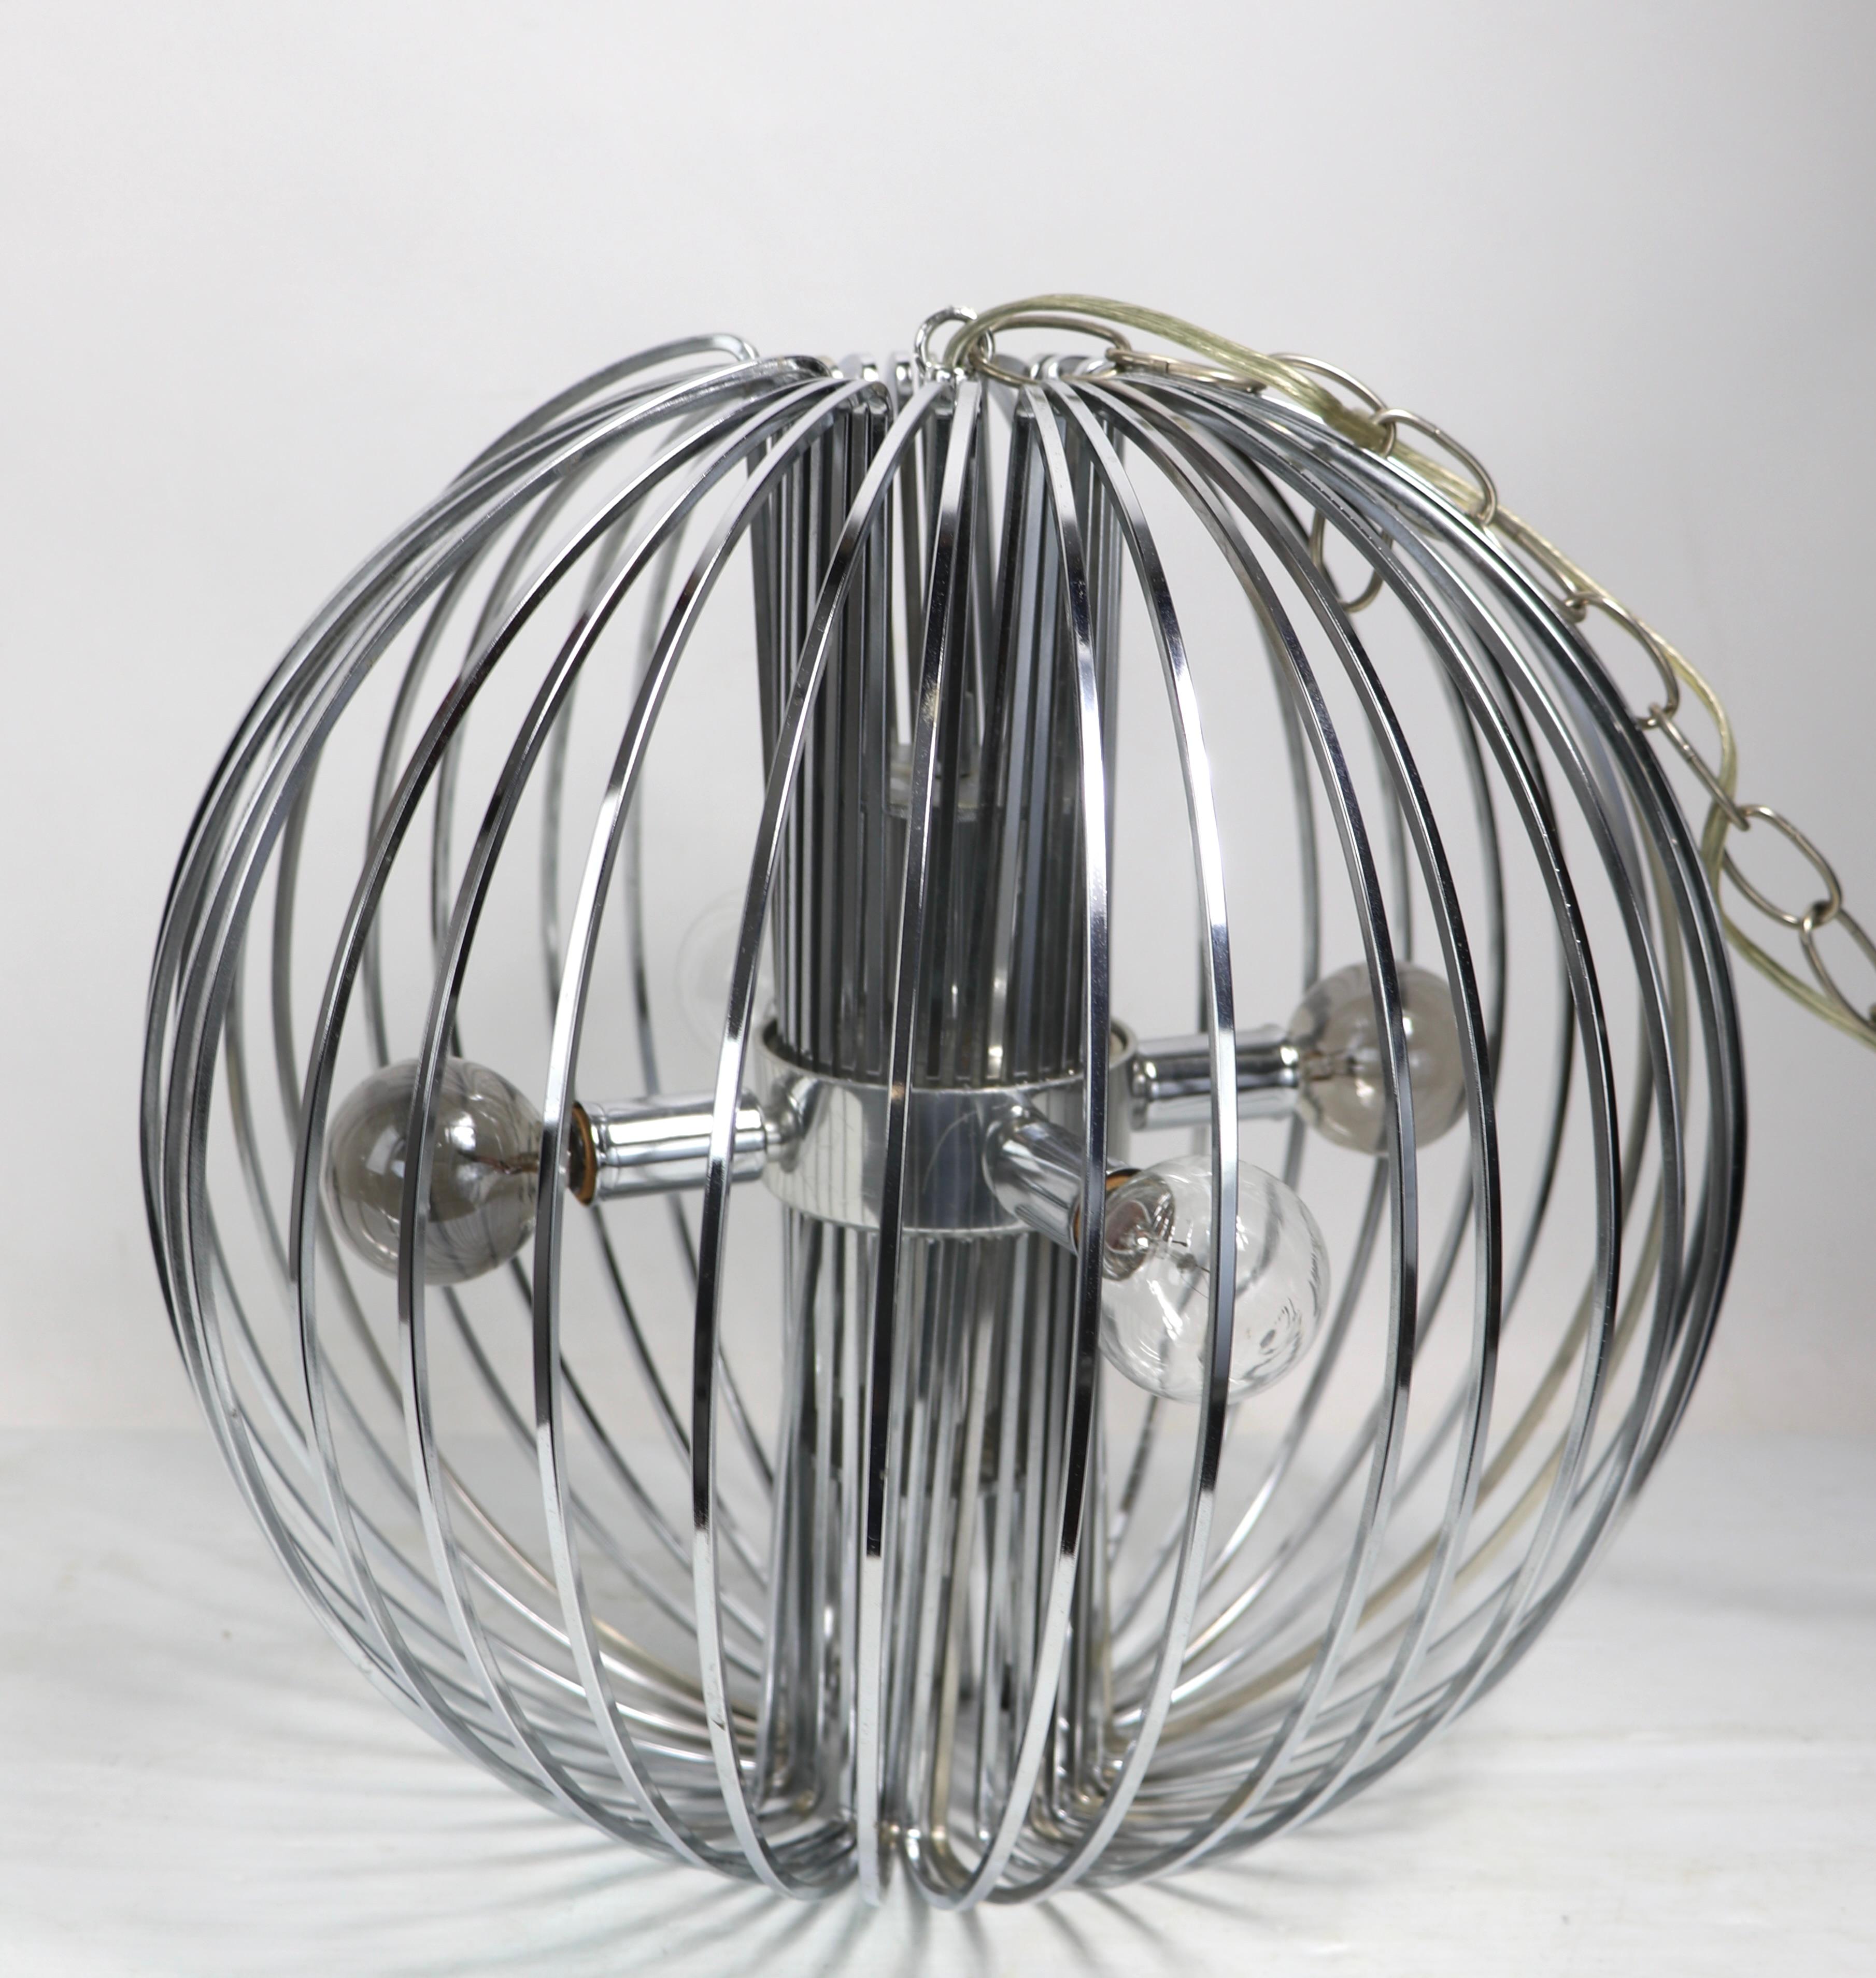 Stunning chrome ball chandelier in excellent original condition, clean working and ready to install. This fixture is often referred to as the Birdcage Chandelier, designed by Gaetano Sciolari, made by Sciolari Lighting, Italy circa 1960/1970's.